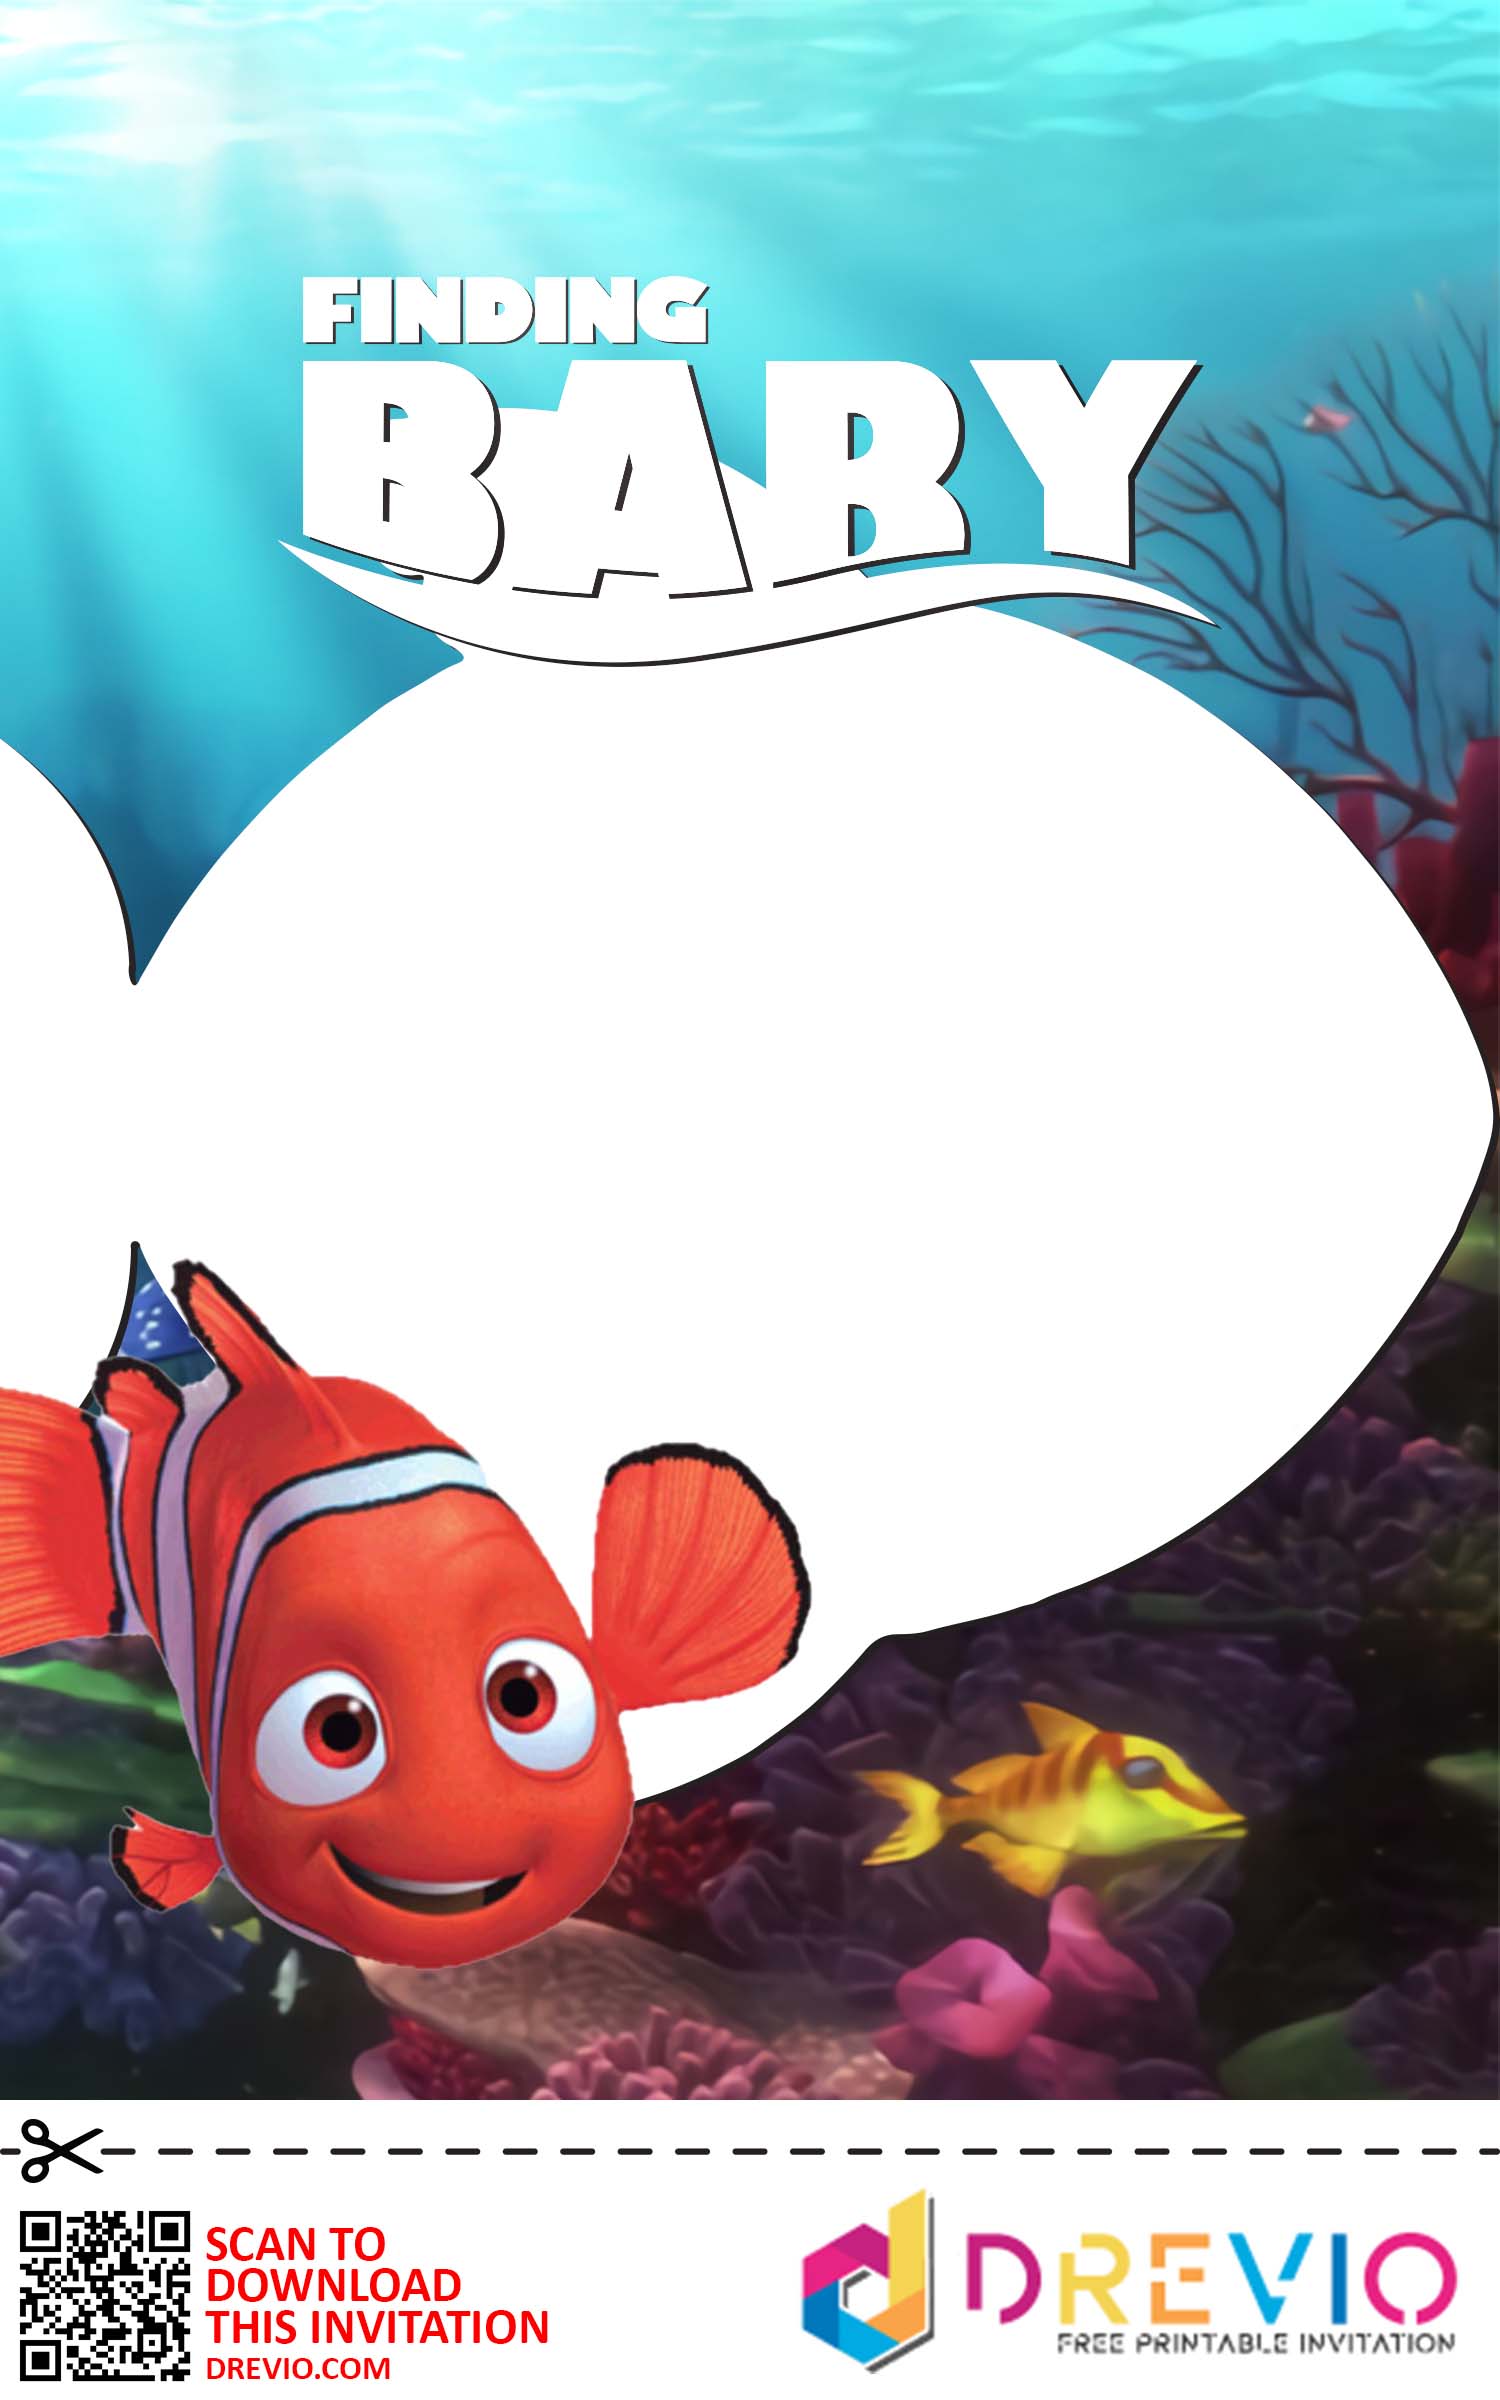 Finding Nemo Themed Baby Shower Invitations + Party Ideas  Download  Hundreds FREE PRINTABLE Birthday Invitation Templates